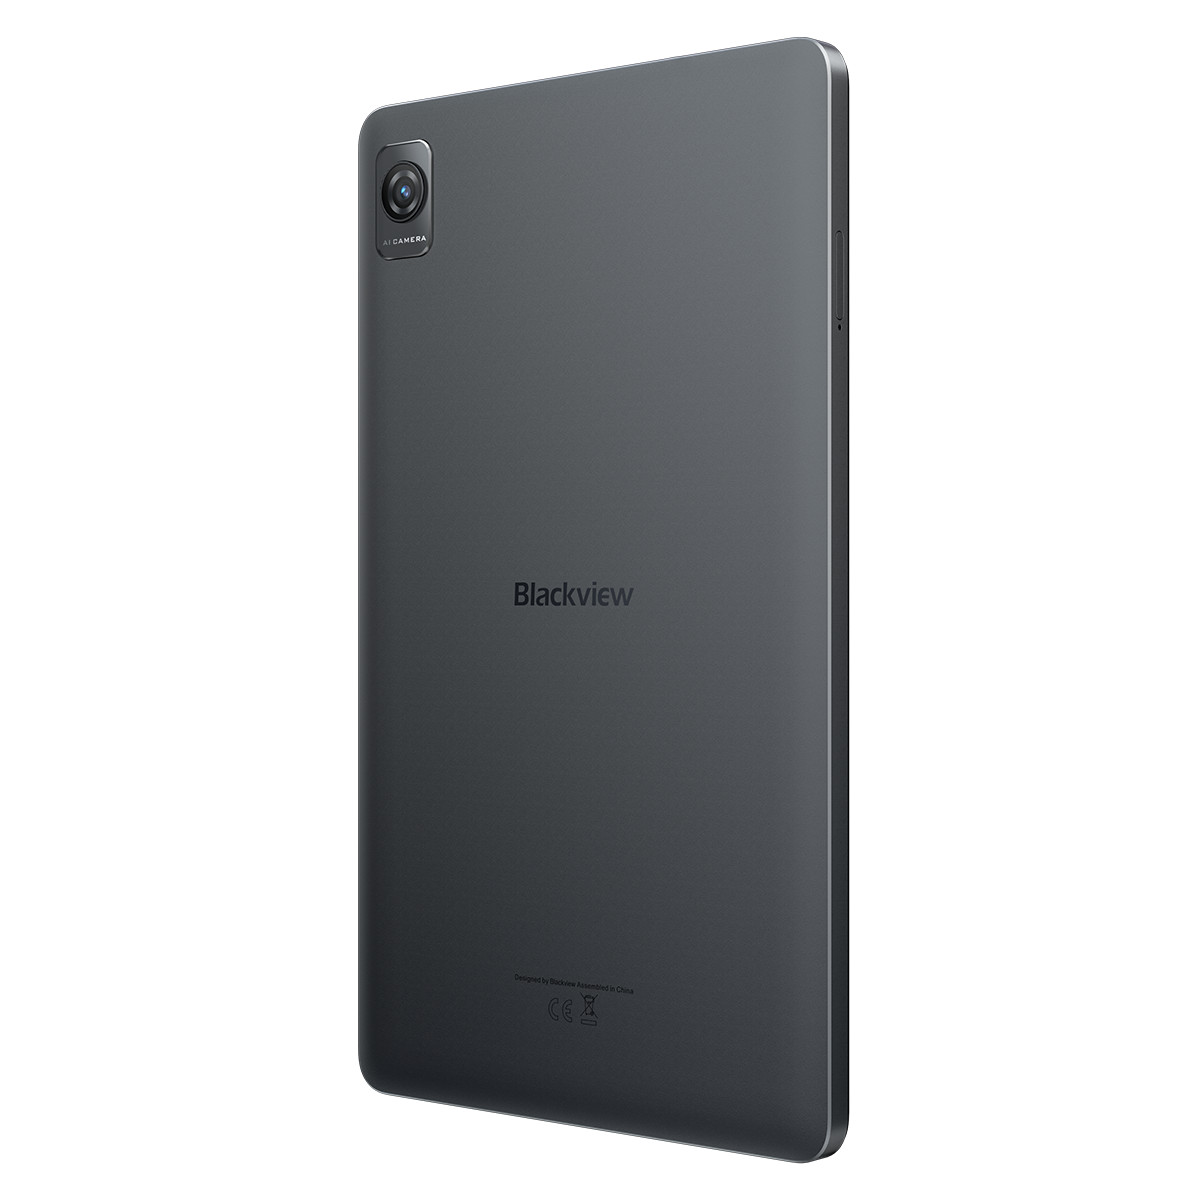 Blackview Tab 60 Tablette Tactile 8.68 Android 13 8Go+128Go-SD